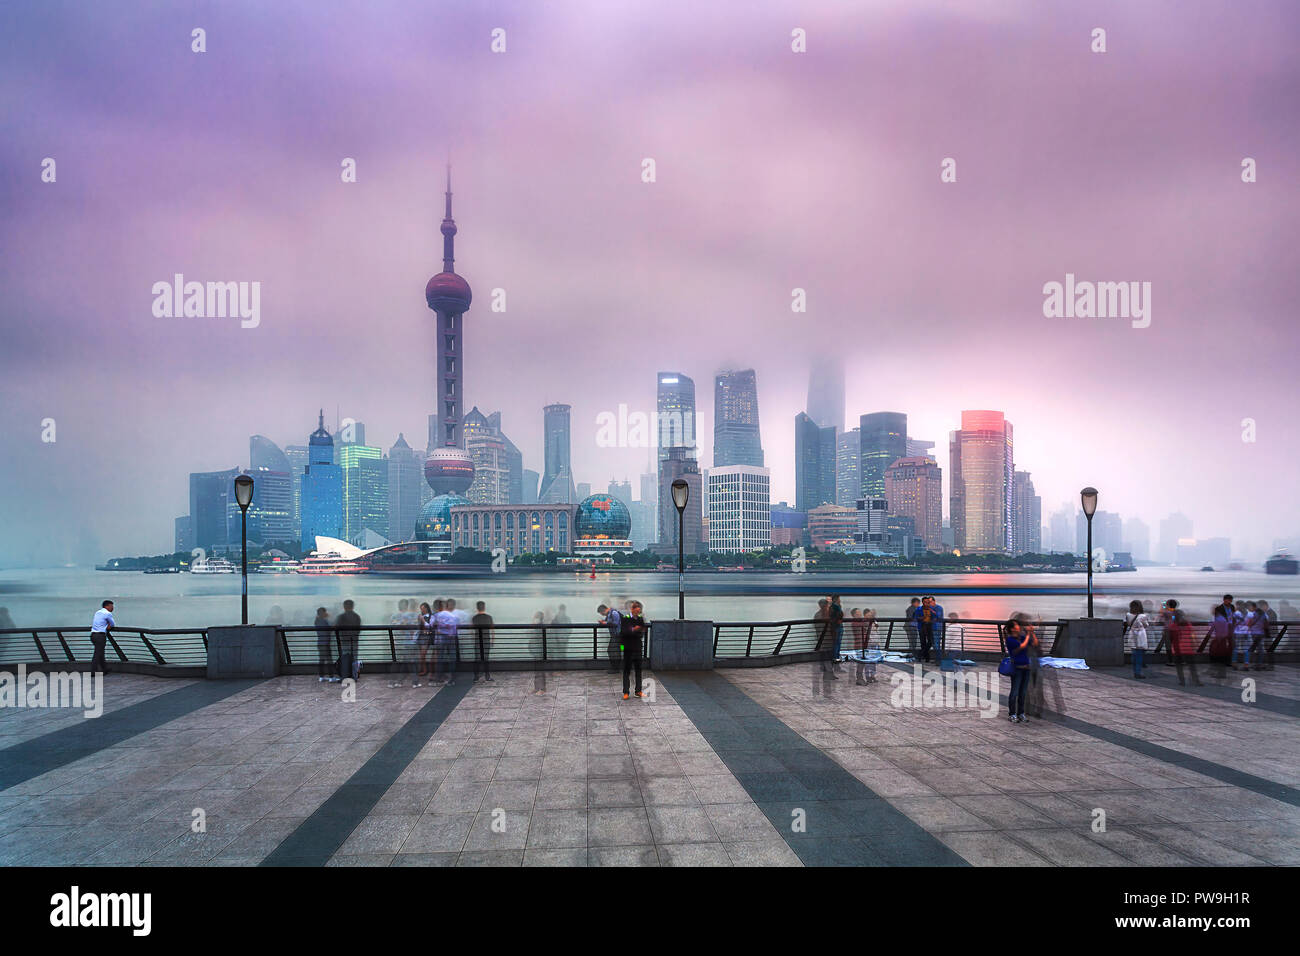 China SHanghai Pudong CBD sunset view over river illuminated skyscrapers and towers covered by pollution smog Stock Photo